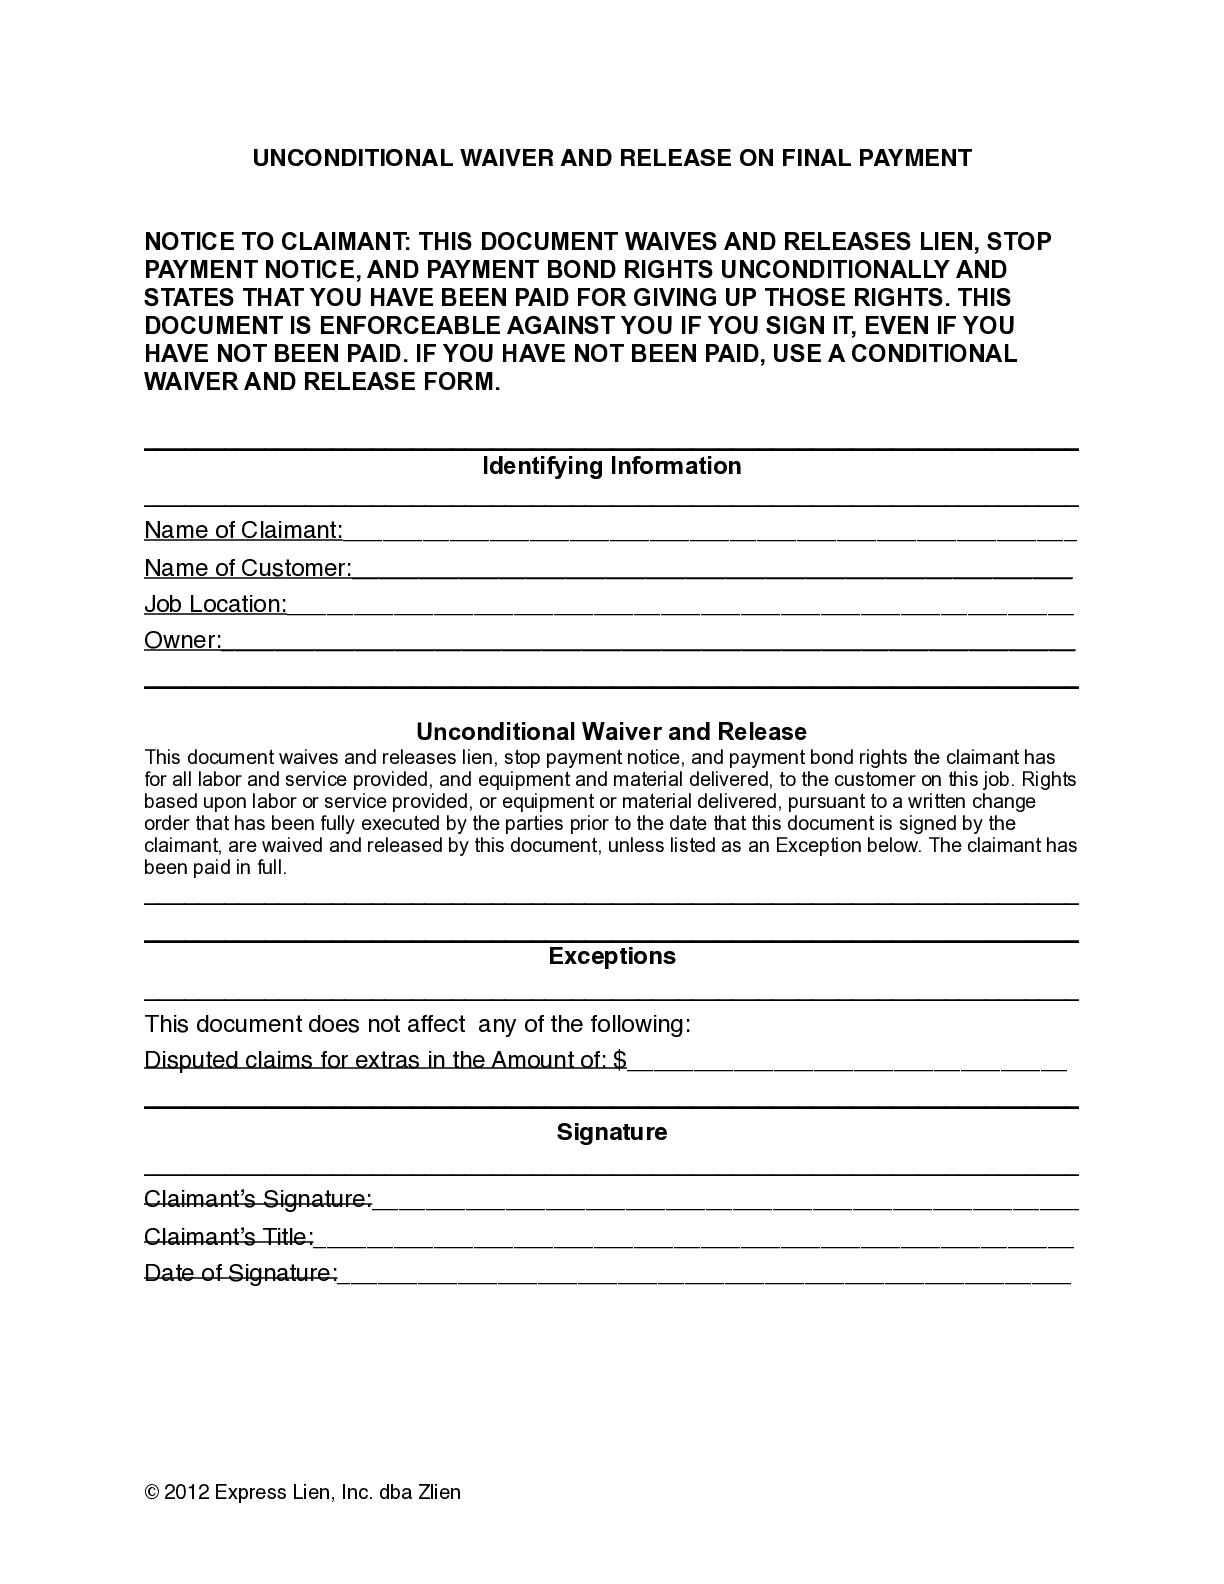 Washington Final Unconditional Lien Waiver Form - free from